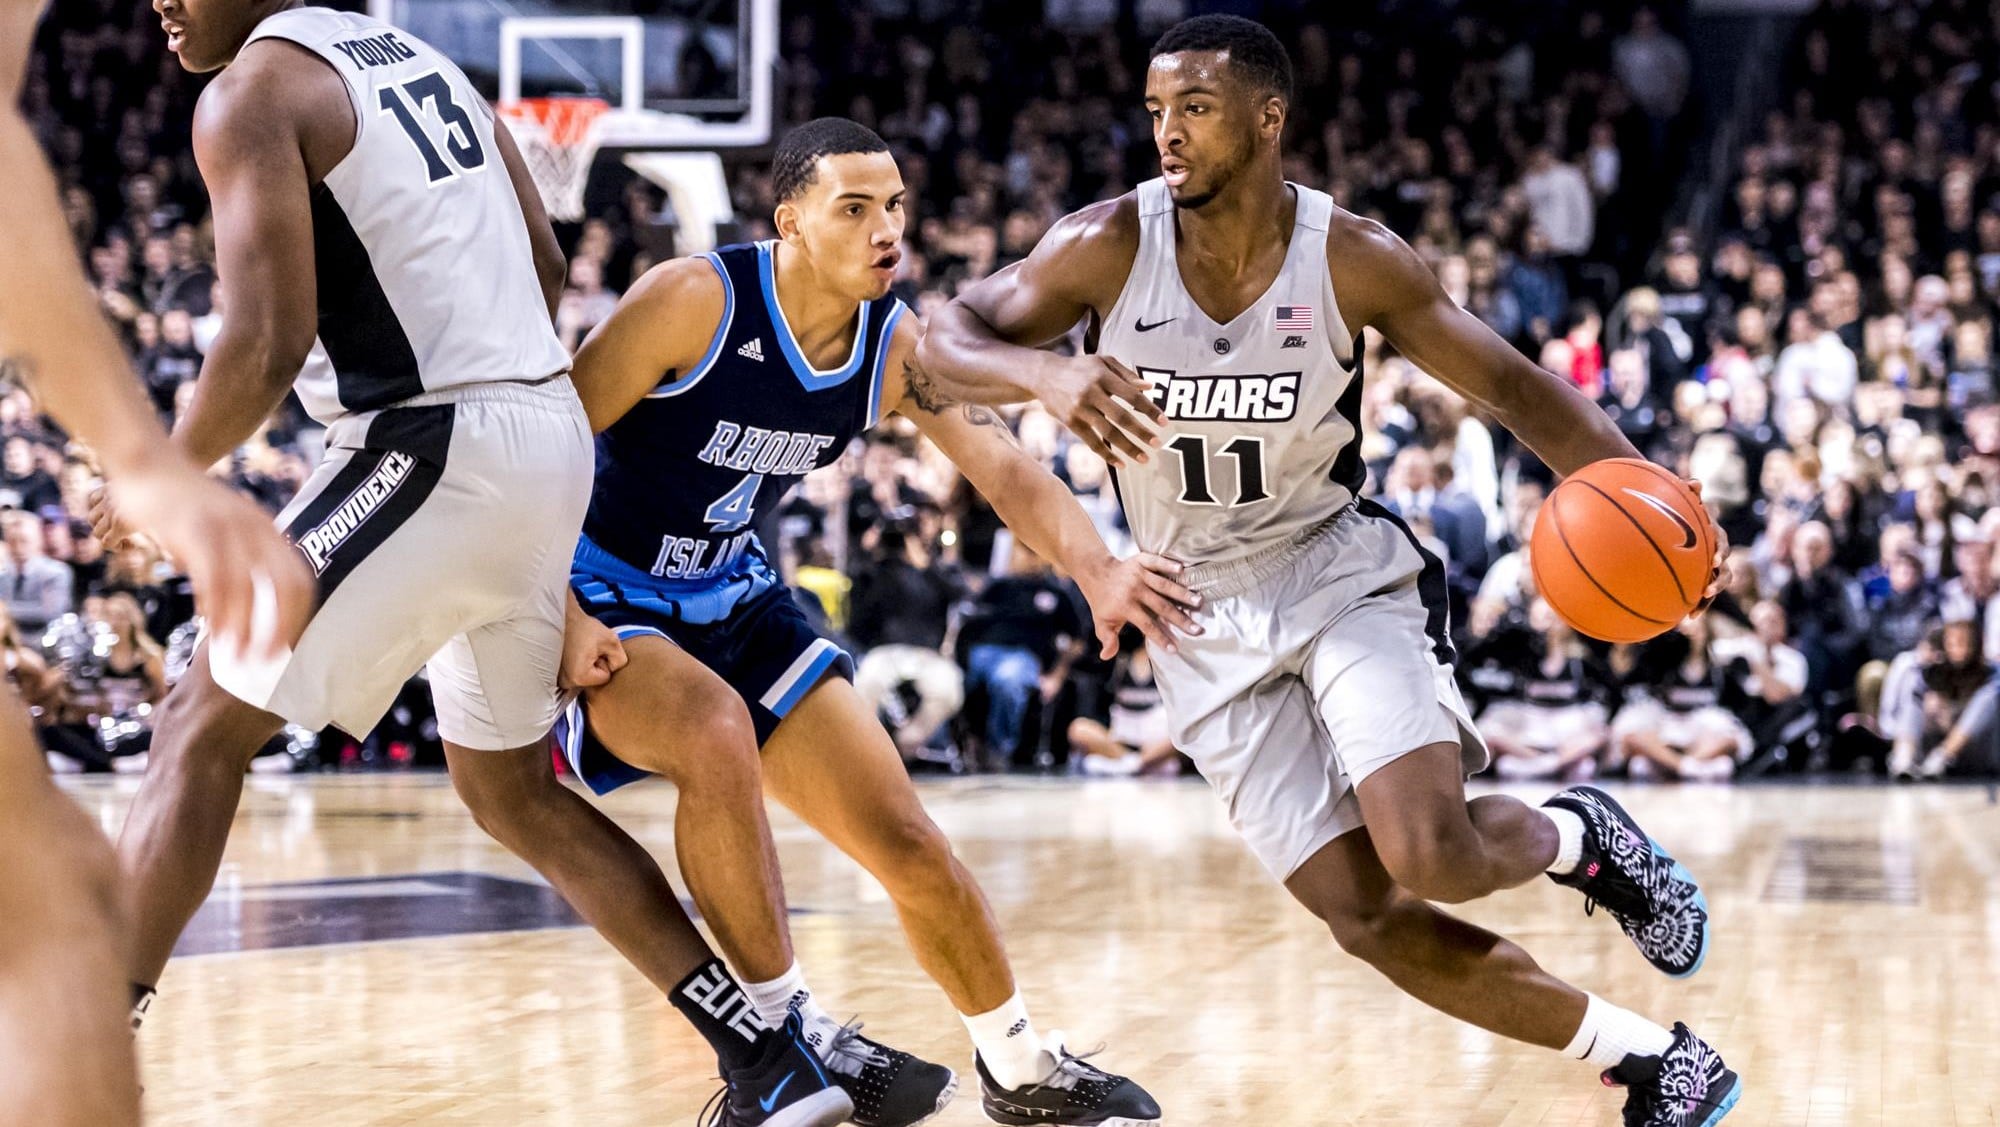 Providence Friars at Xavier Musketeers